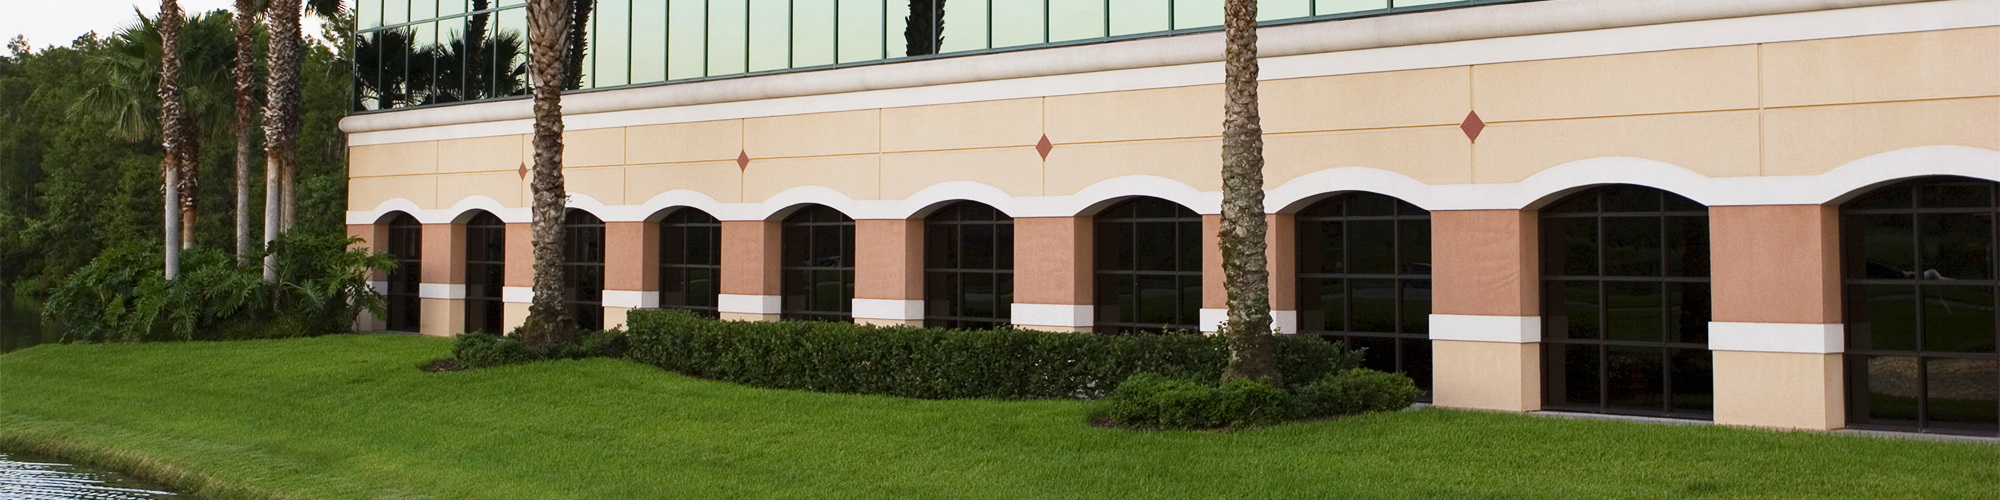 Commercial Landscaping in New Smyrna Beach, FL